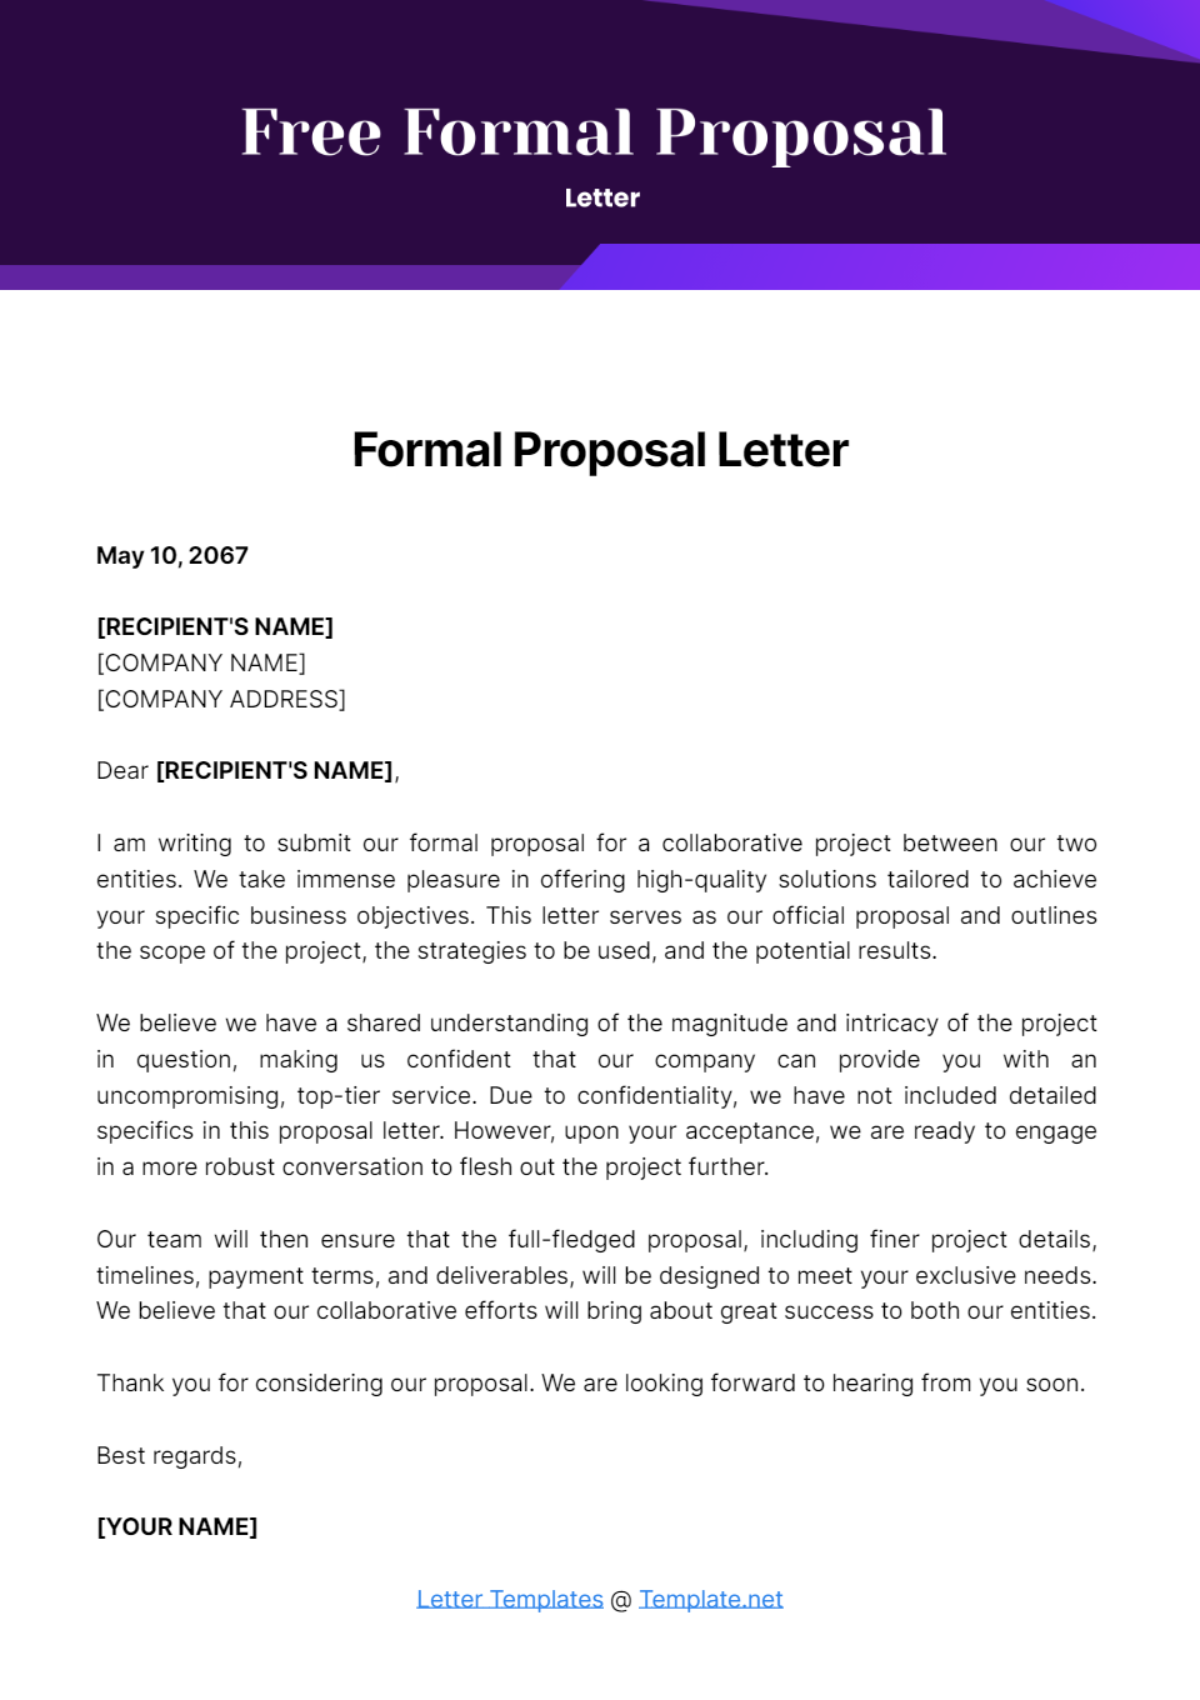 Free Formal Proposal Letter Template